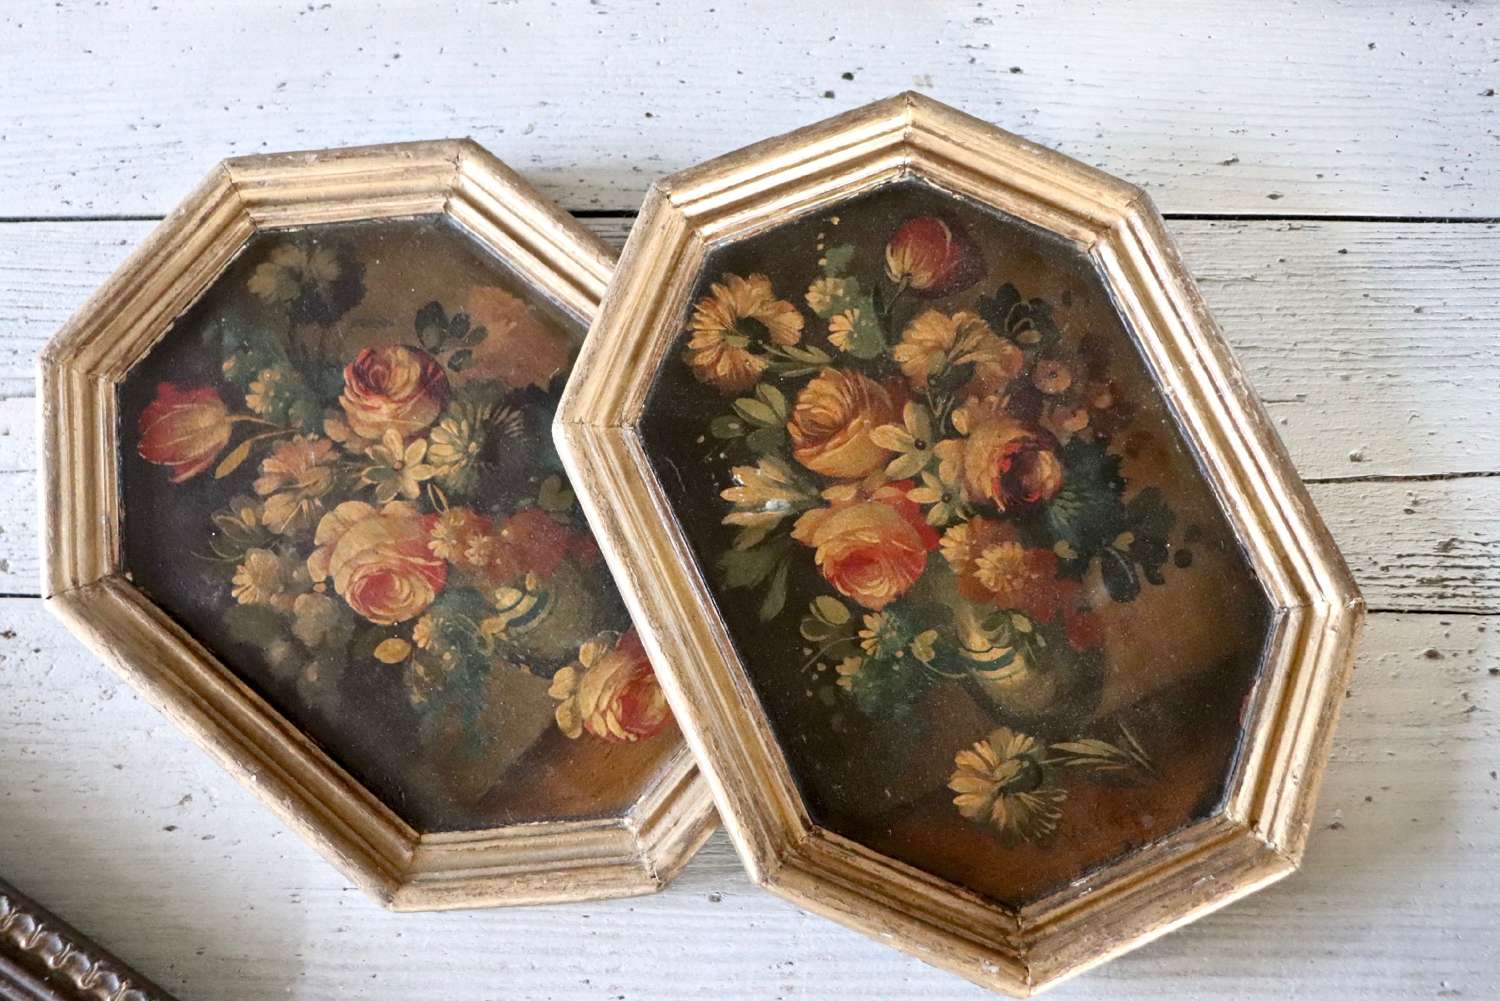 Pair of floral still lifes within gilt frames